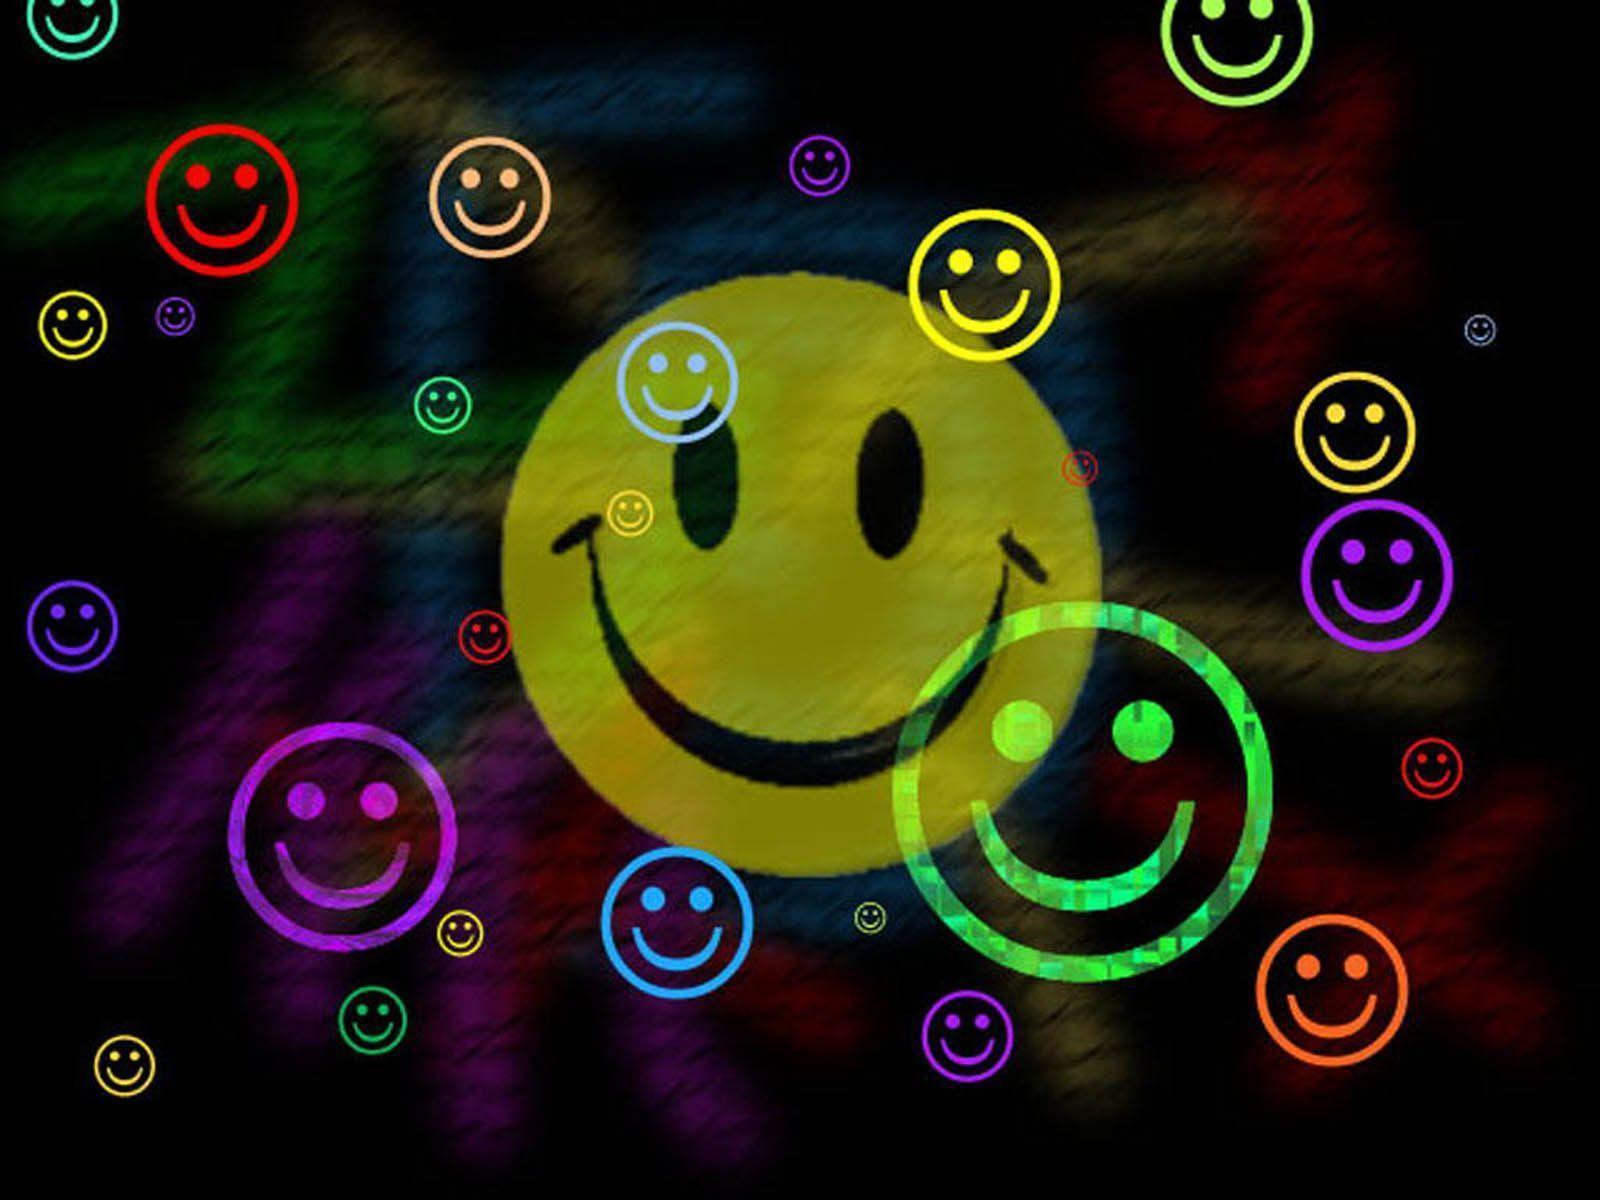 Smiley Faces Background